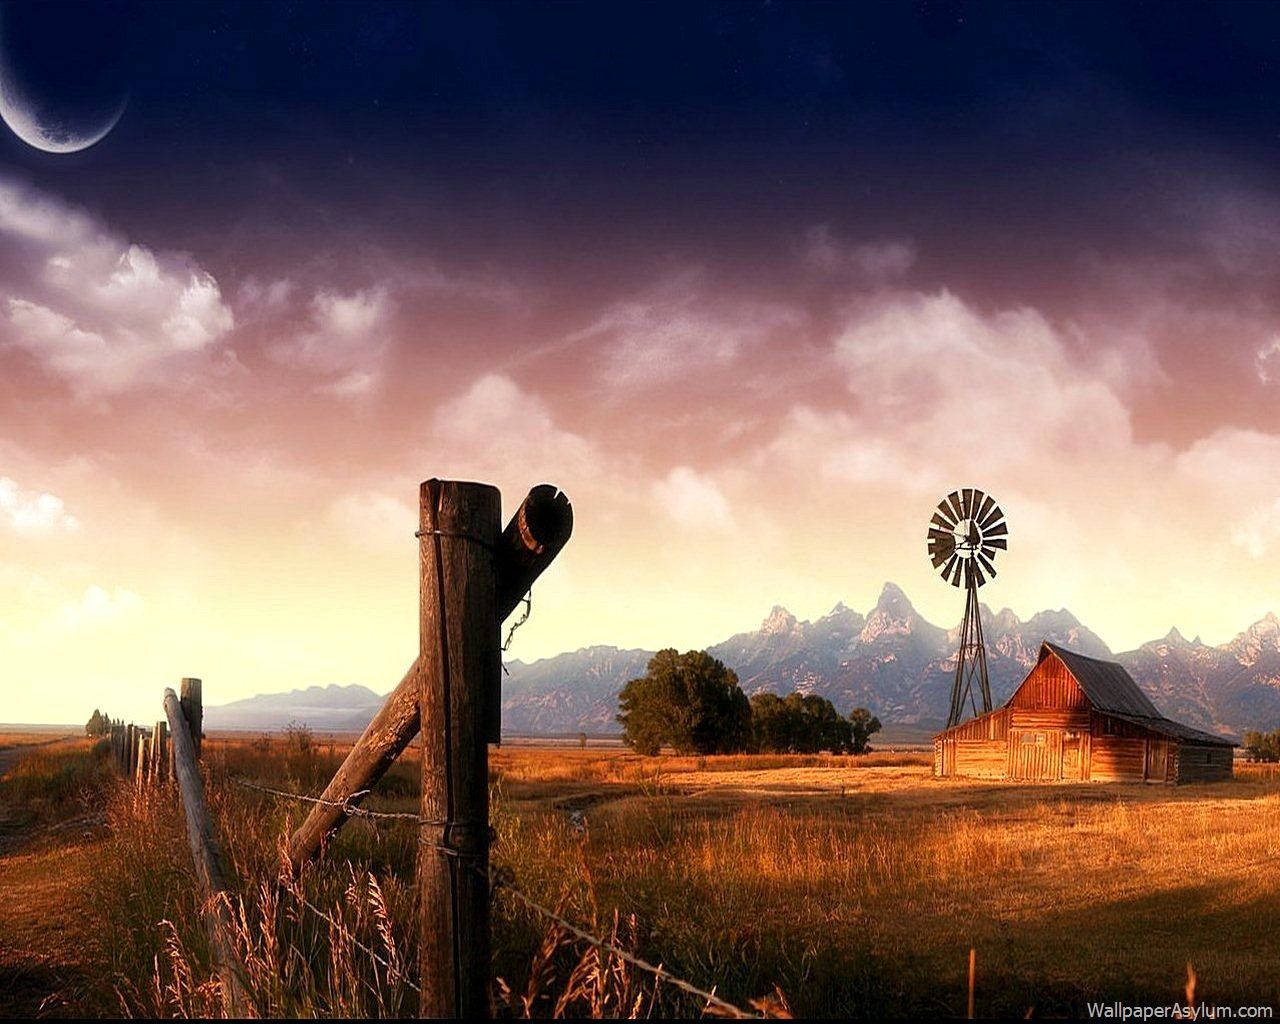 A peaceful night on a country farm Wallpaper